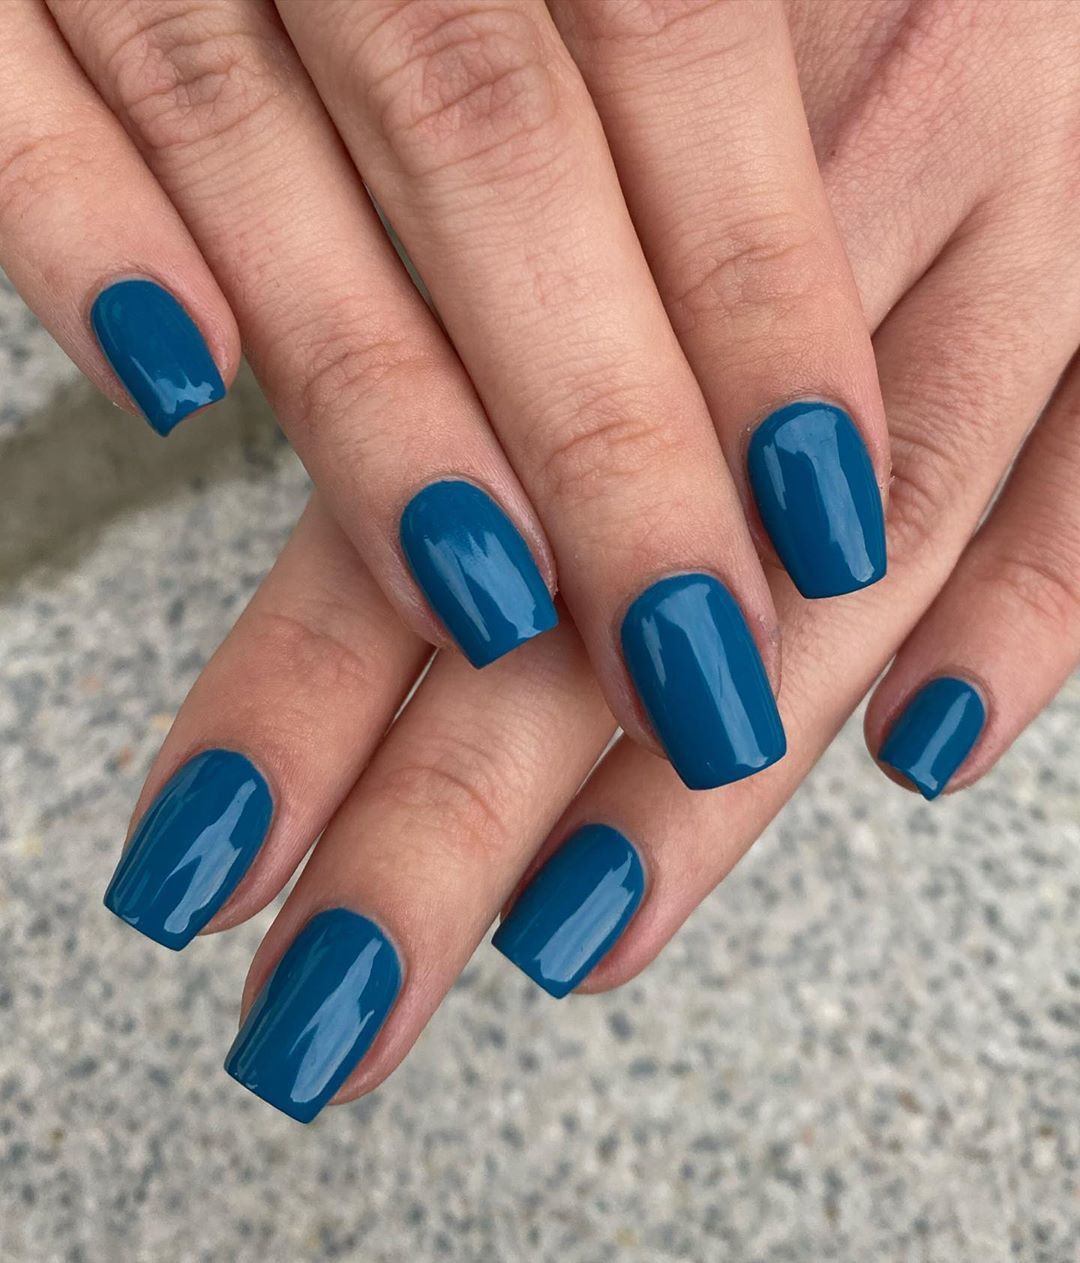 48 Stunning Blue Nail Designs for a Bold and Beautiful Look,blue nails color,blue nails design,blue nails short,blue nails treatment,blue nails acrylics,blue nails coffin